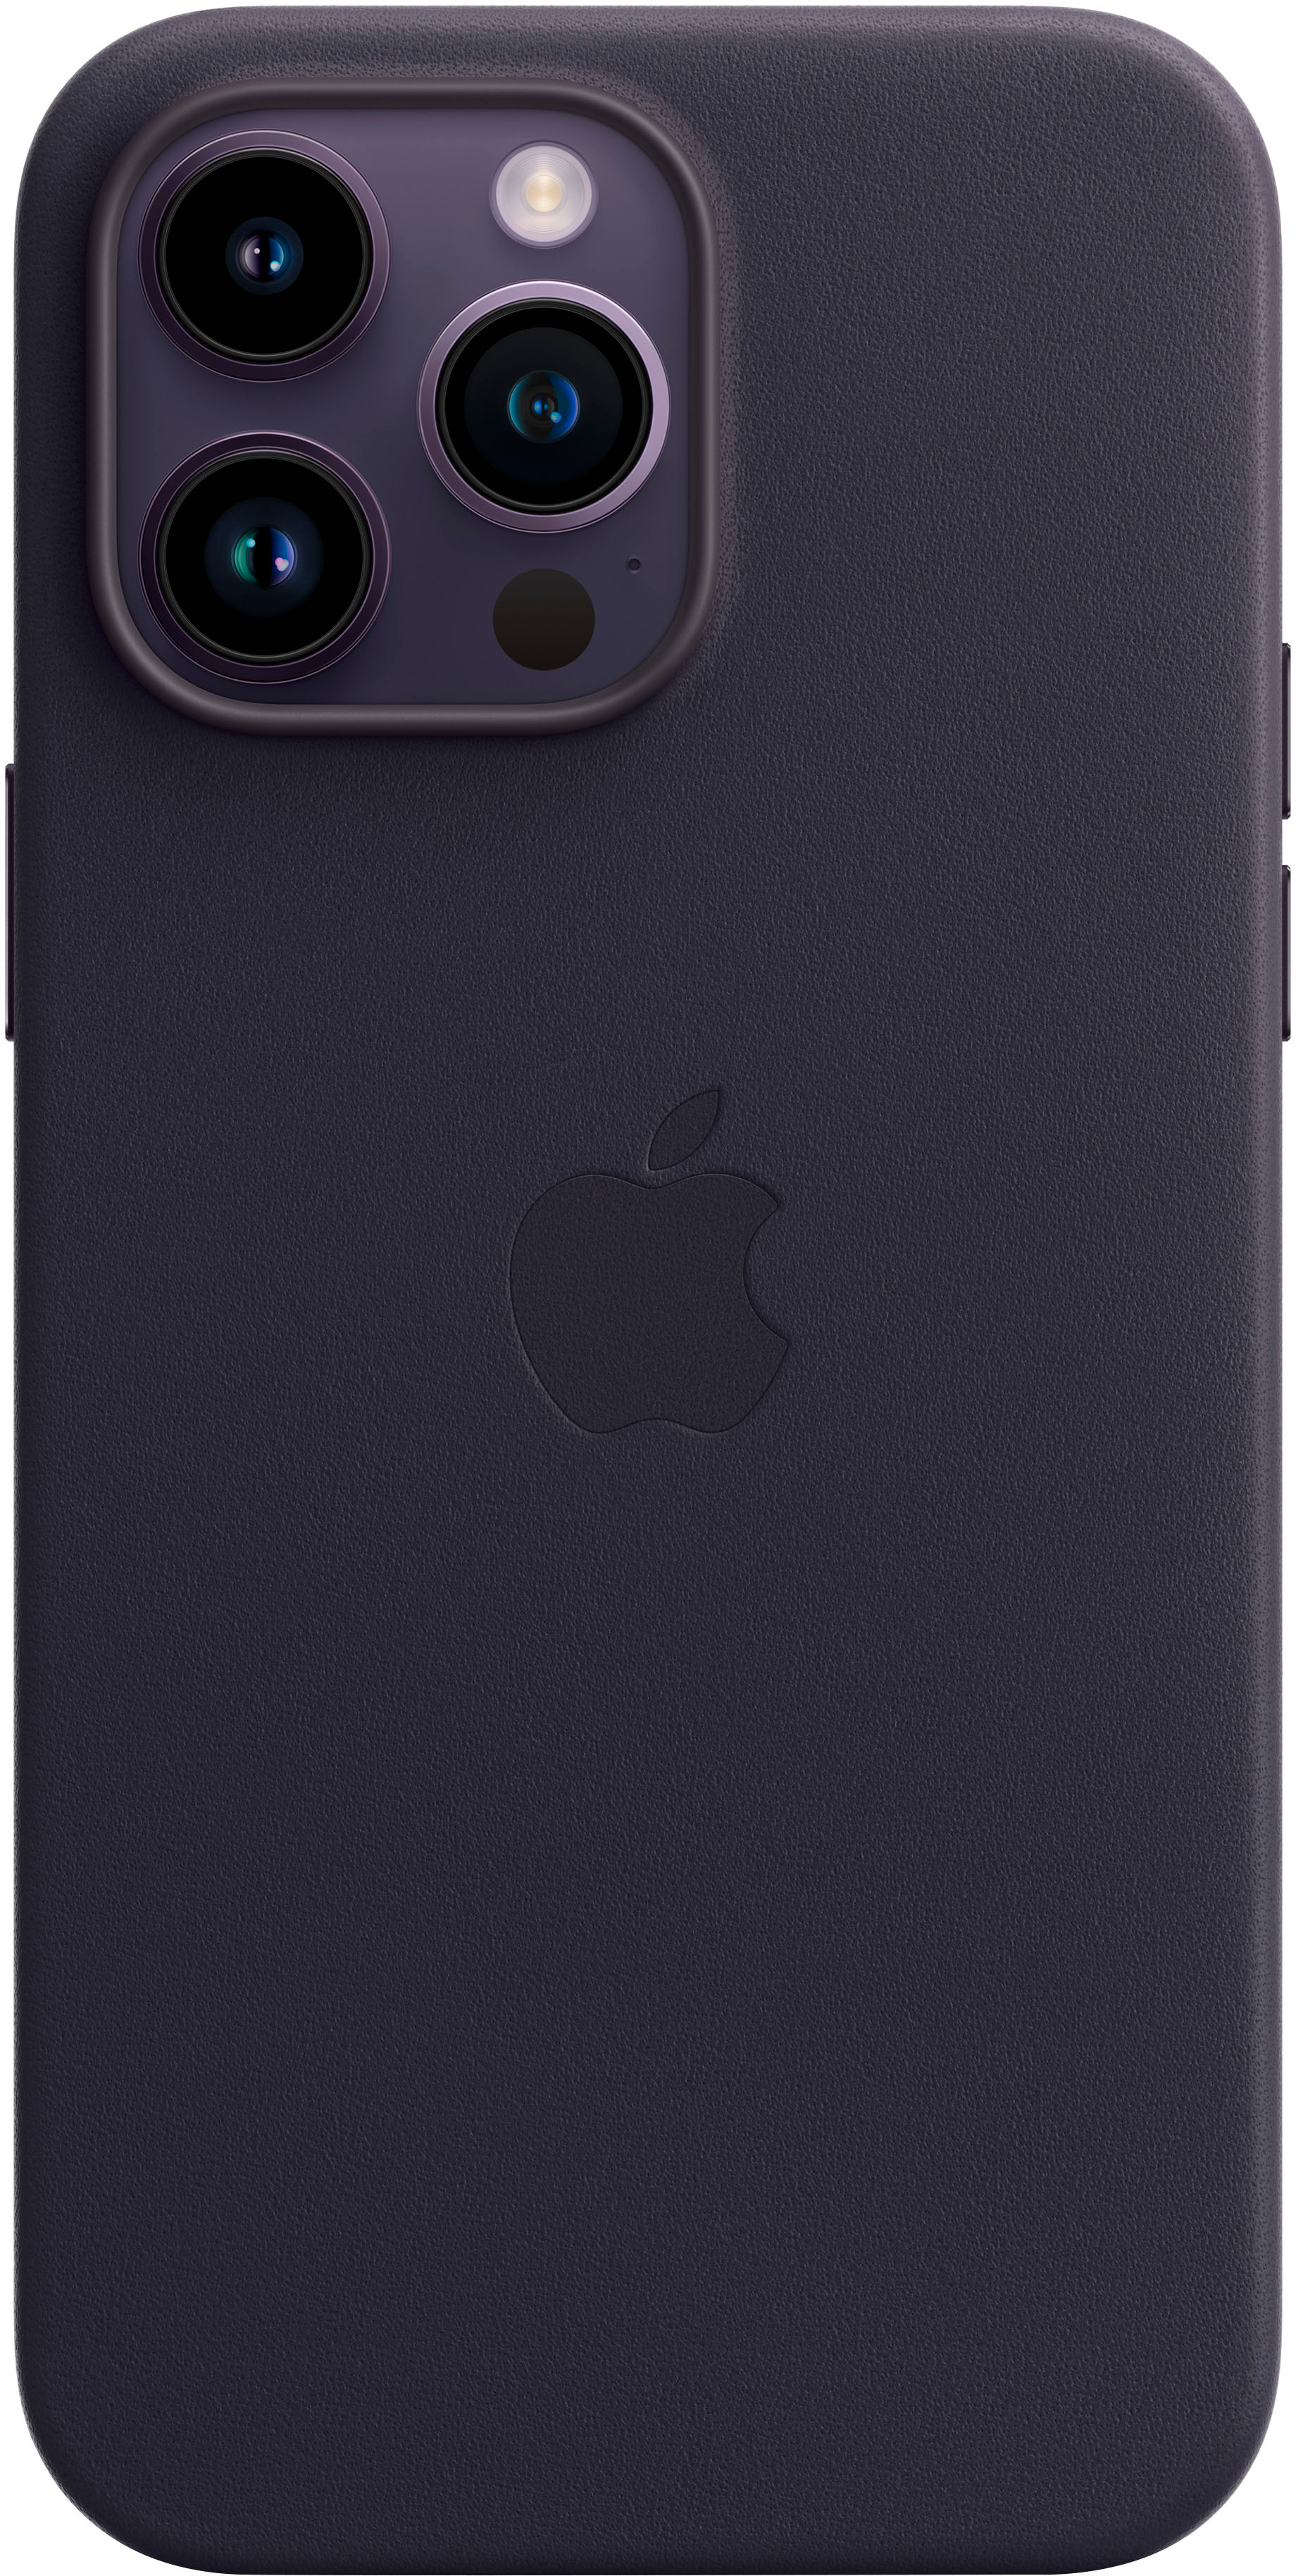 iPhone 14 Pro Max Case in Heather Pebble